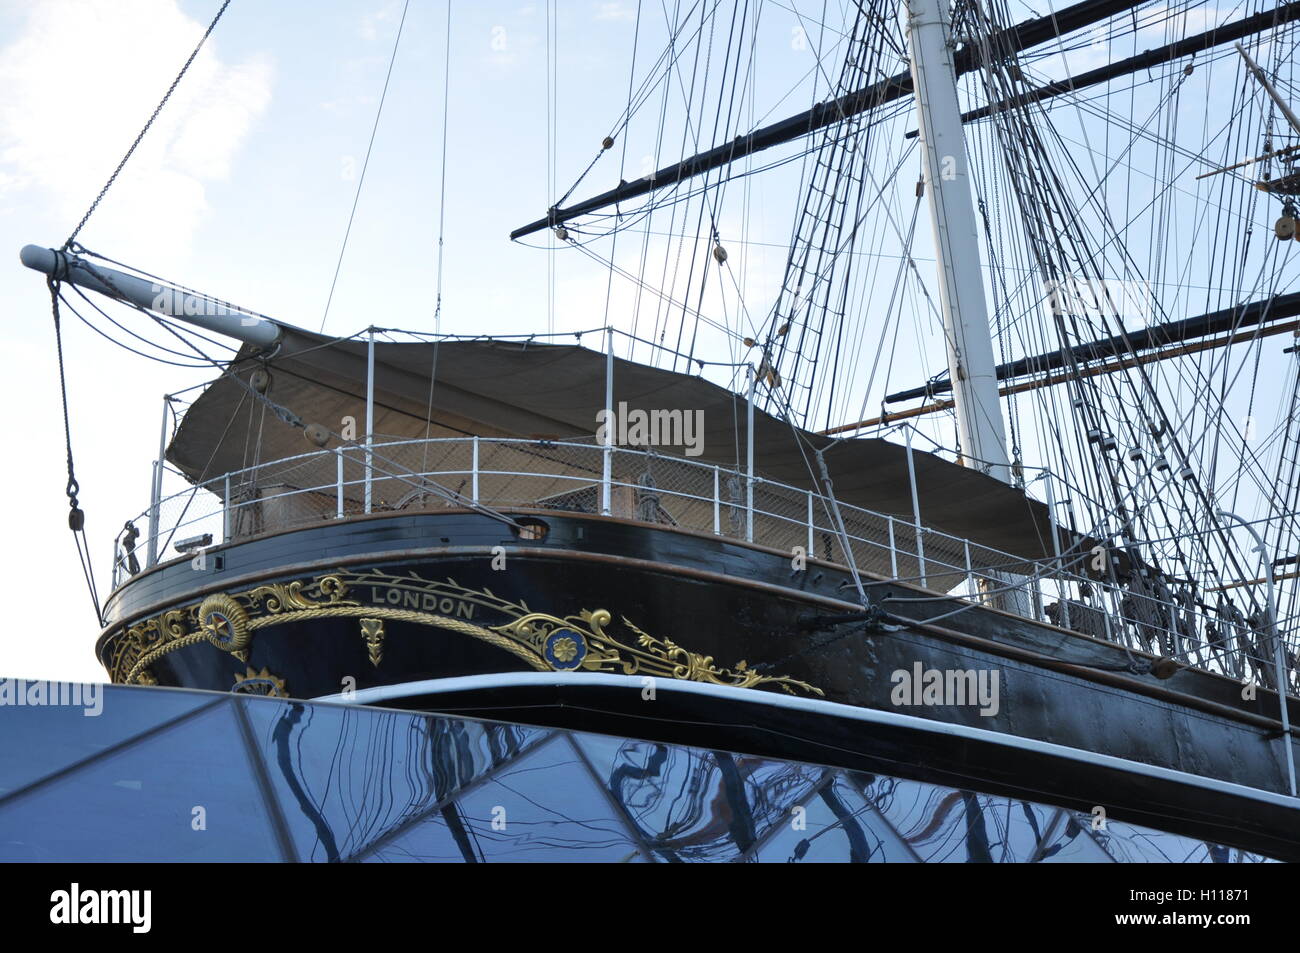 Photograph of the majestic 19th Century tea clipper trading ship Cutty Sark. Greenwich London UK Stock Photo